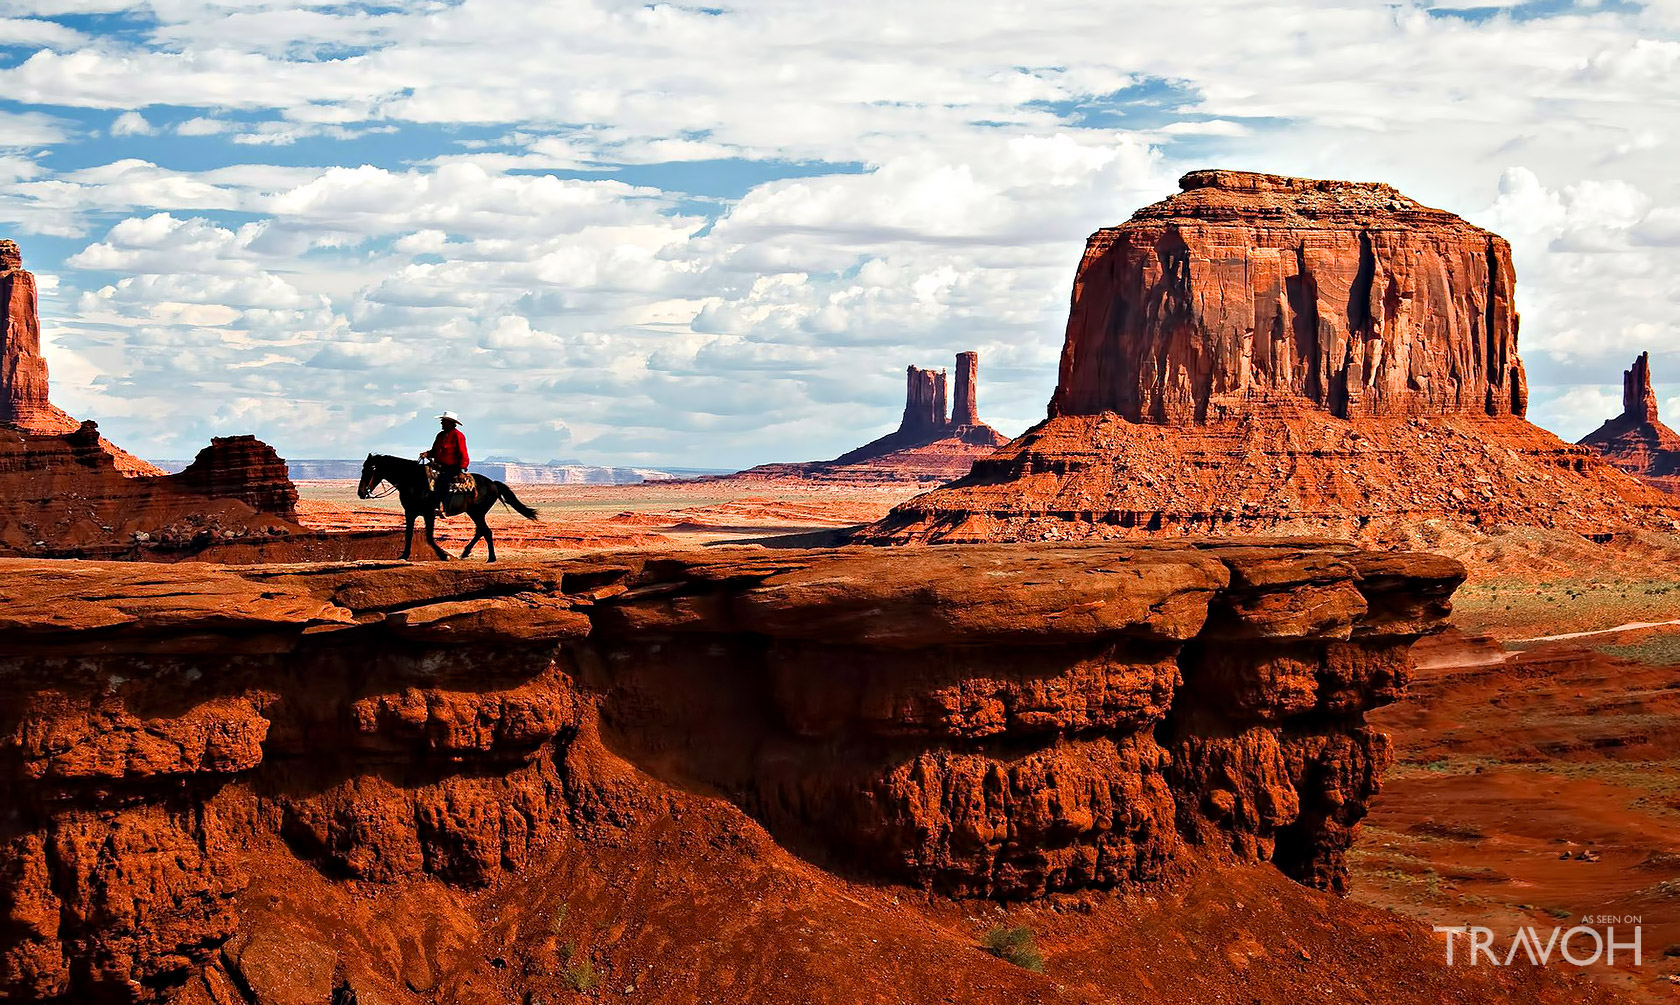 Monument Valley – A Daunting Region of the Colorado Plateau on the Arizona-Utah State Line